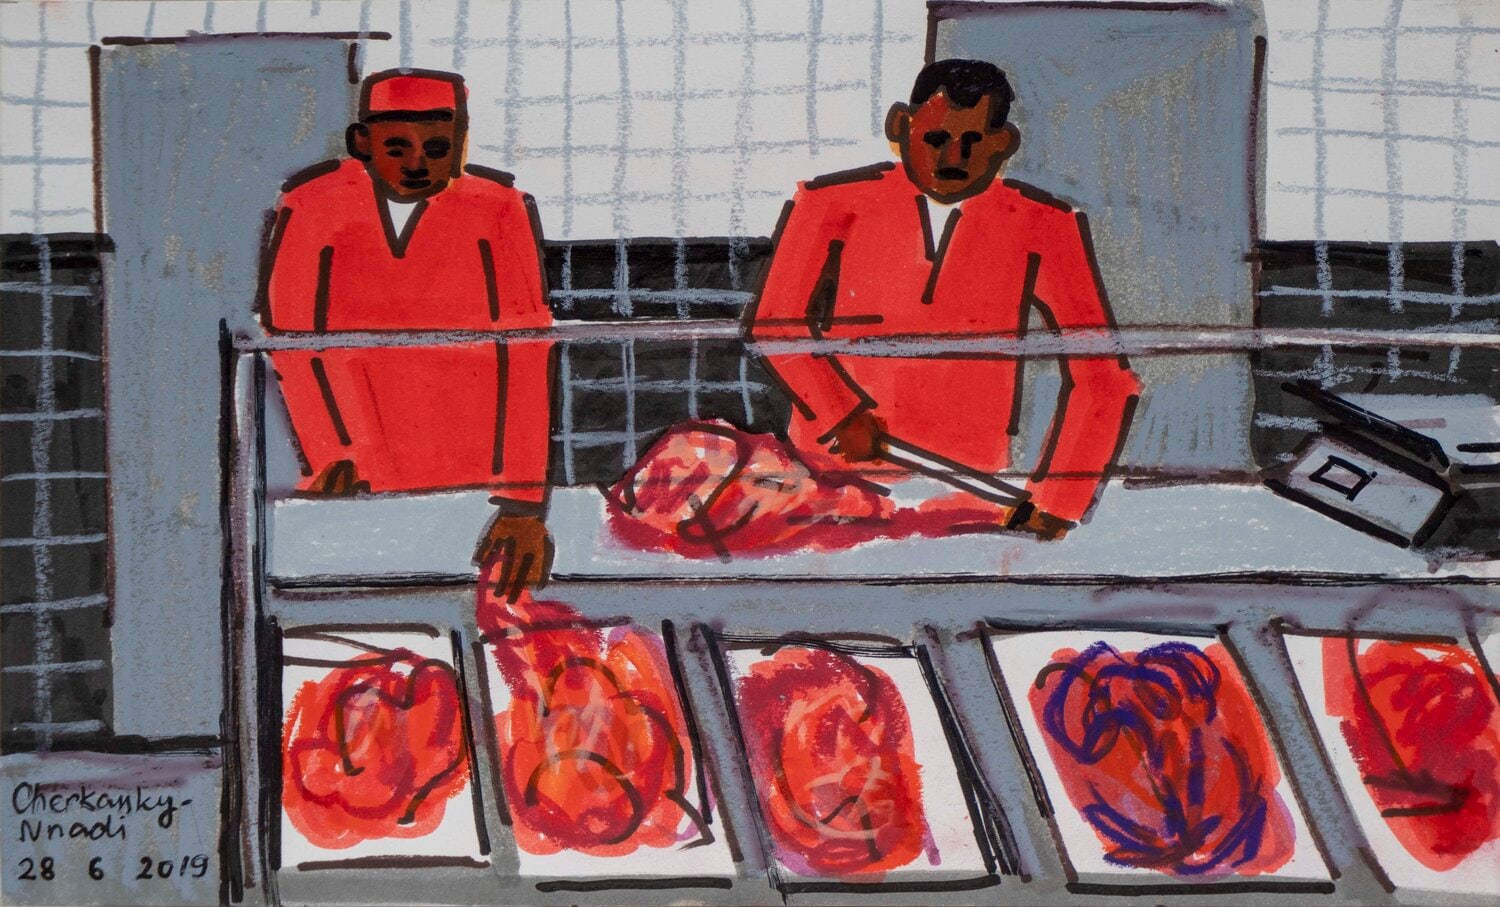 Zoya Cherkassky
An Eritrean Meat Shop, 2019
Markers on paper
6 x 9 inches